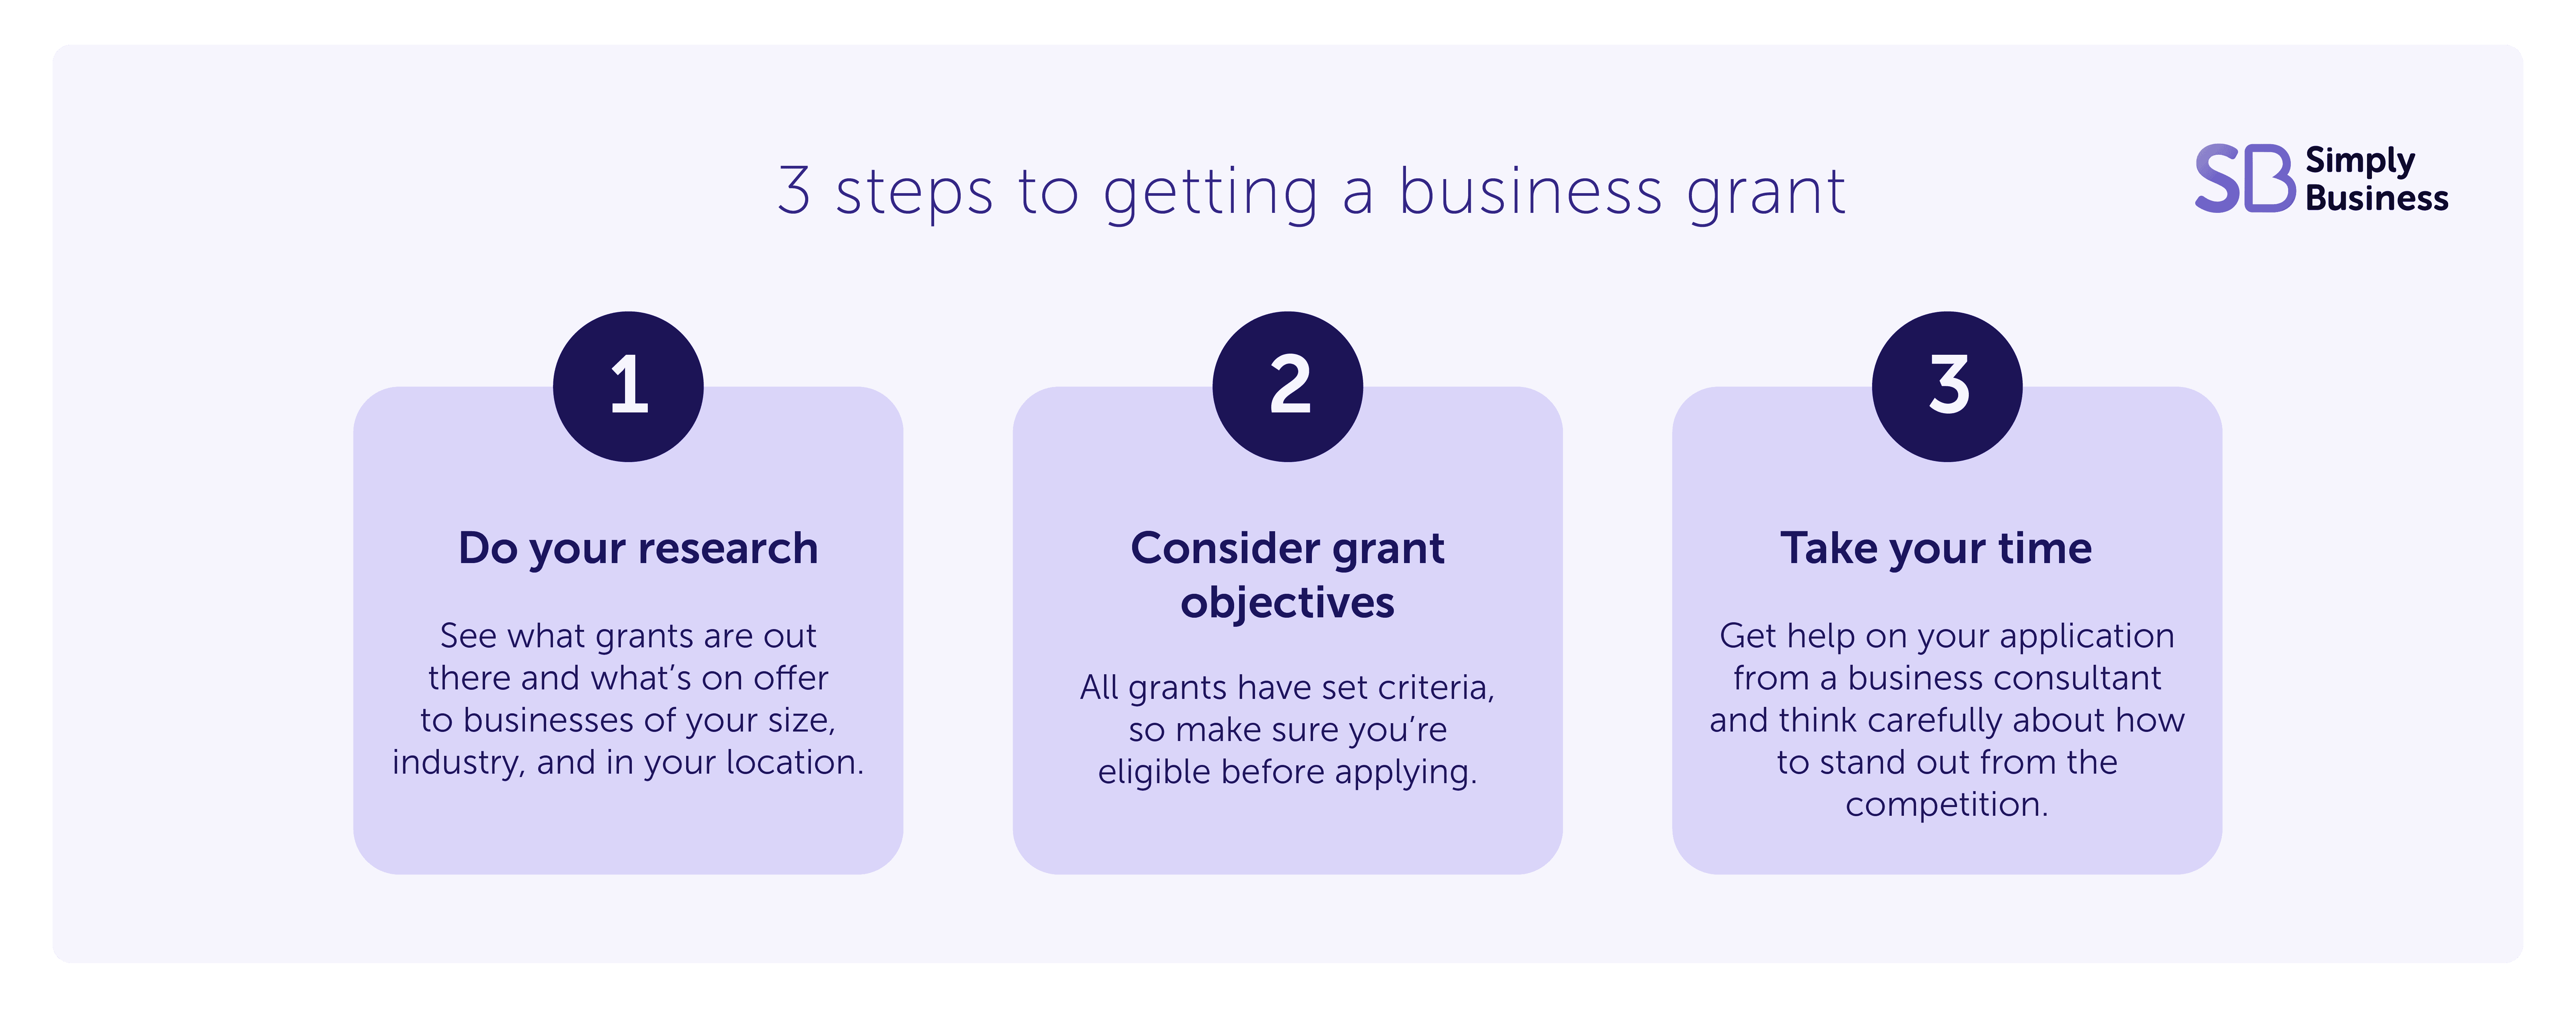 Infographic showing three steps to getting a business grant